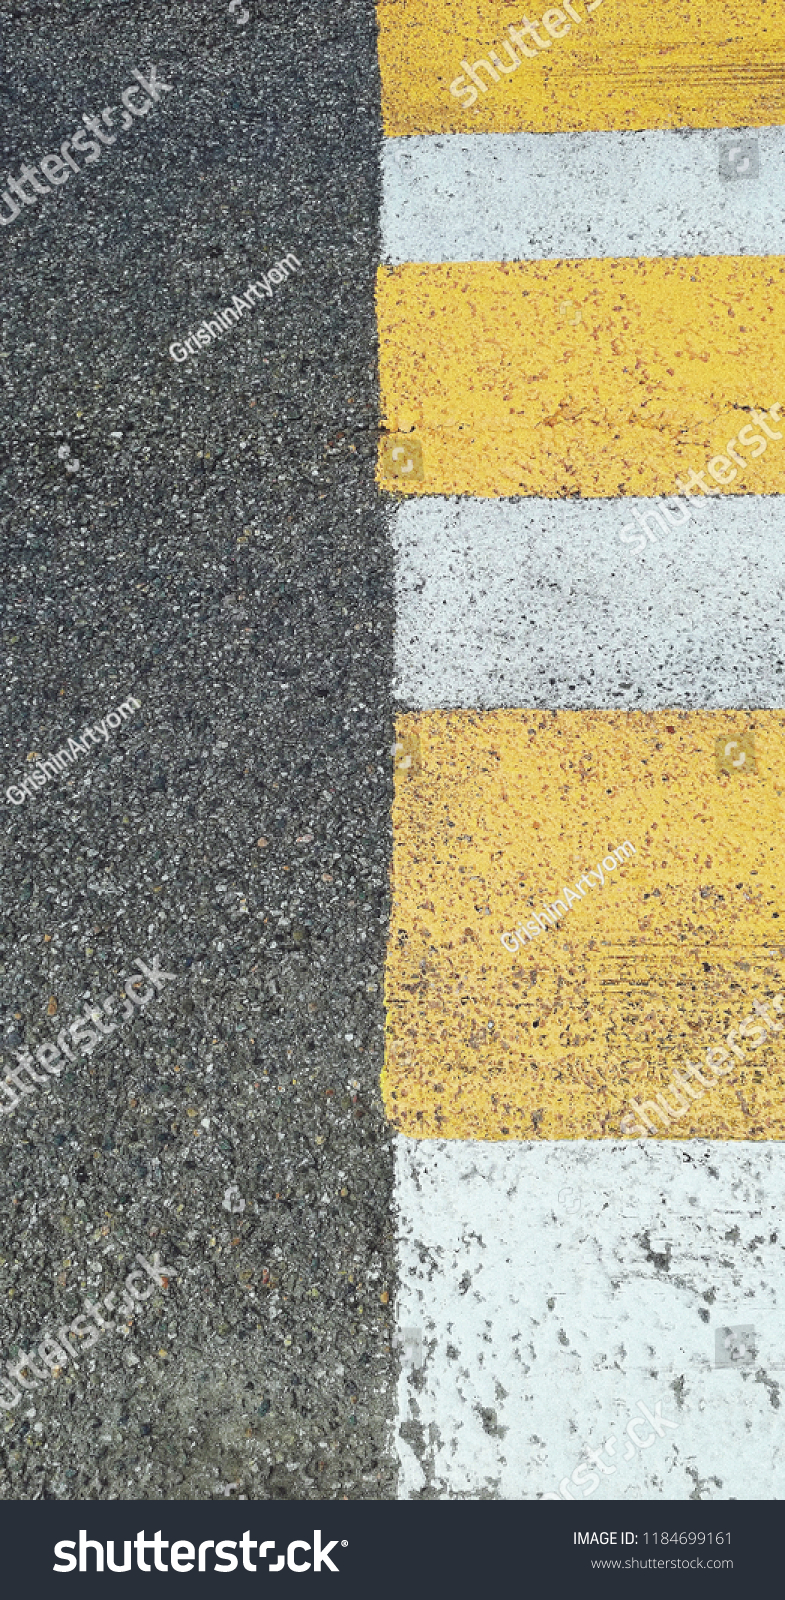 Zebra crossing - element of the Road. Gray lines, yelloy lines and White lines.  #1184699161